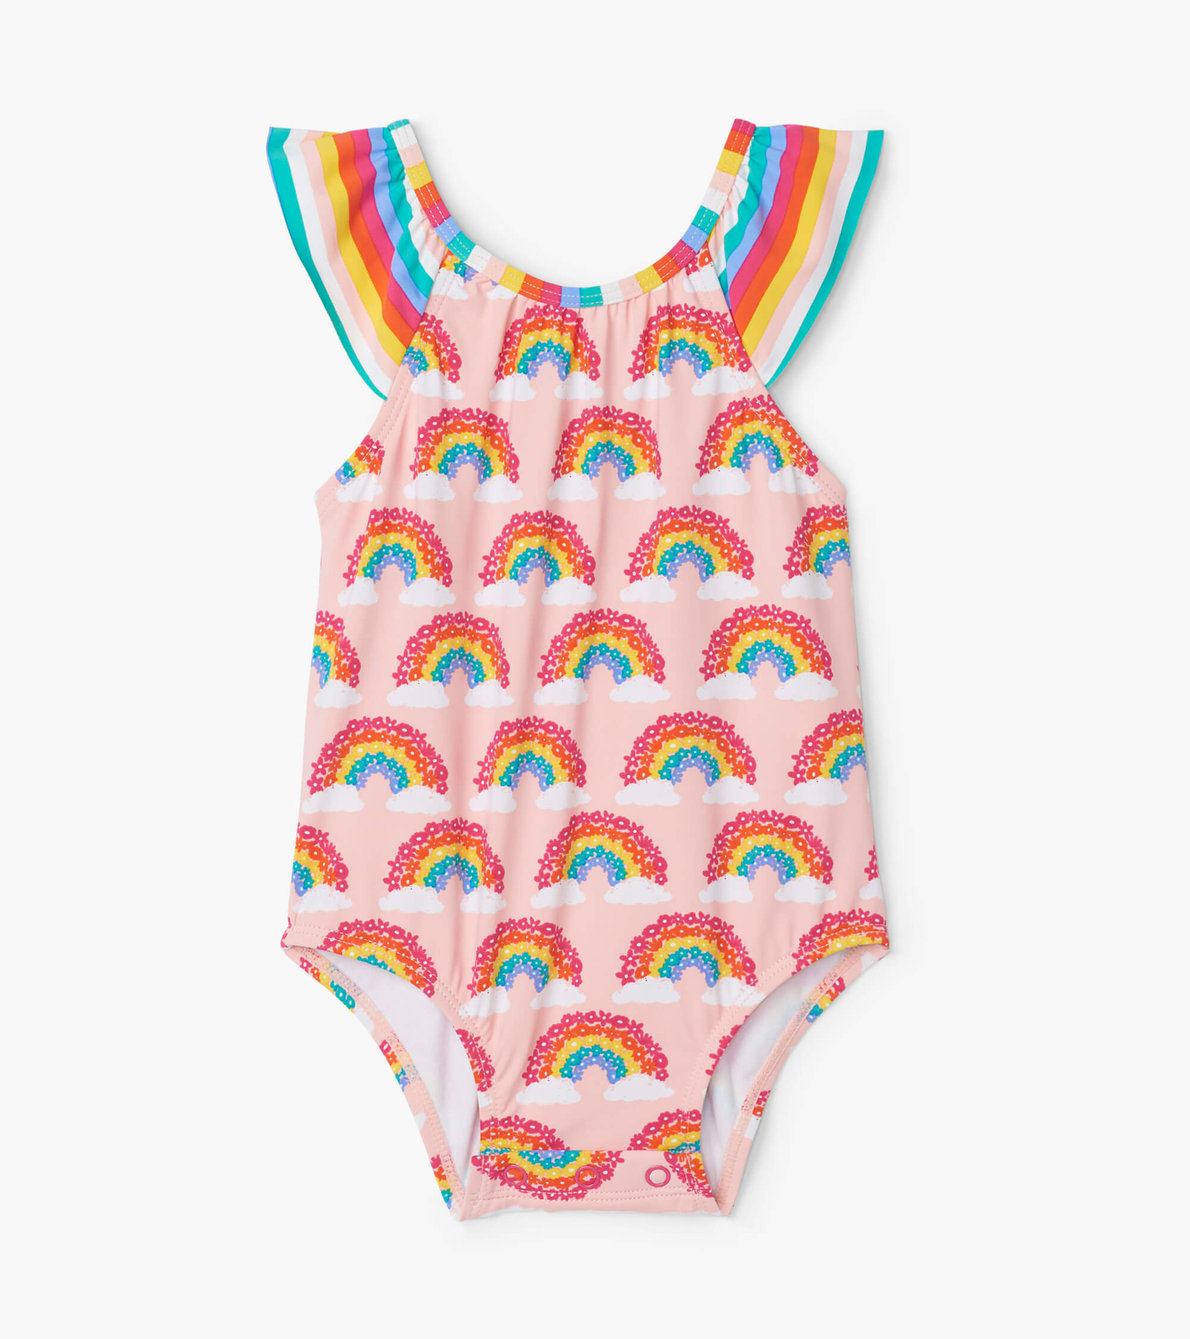 View larger image of Magical Rainbows Baby Ruffle Swimsuit